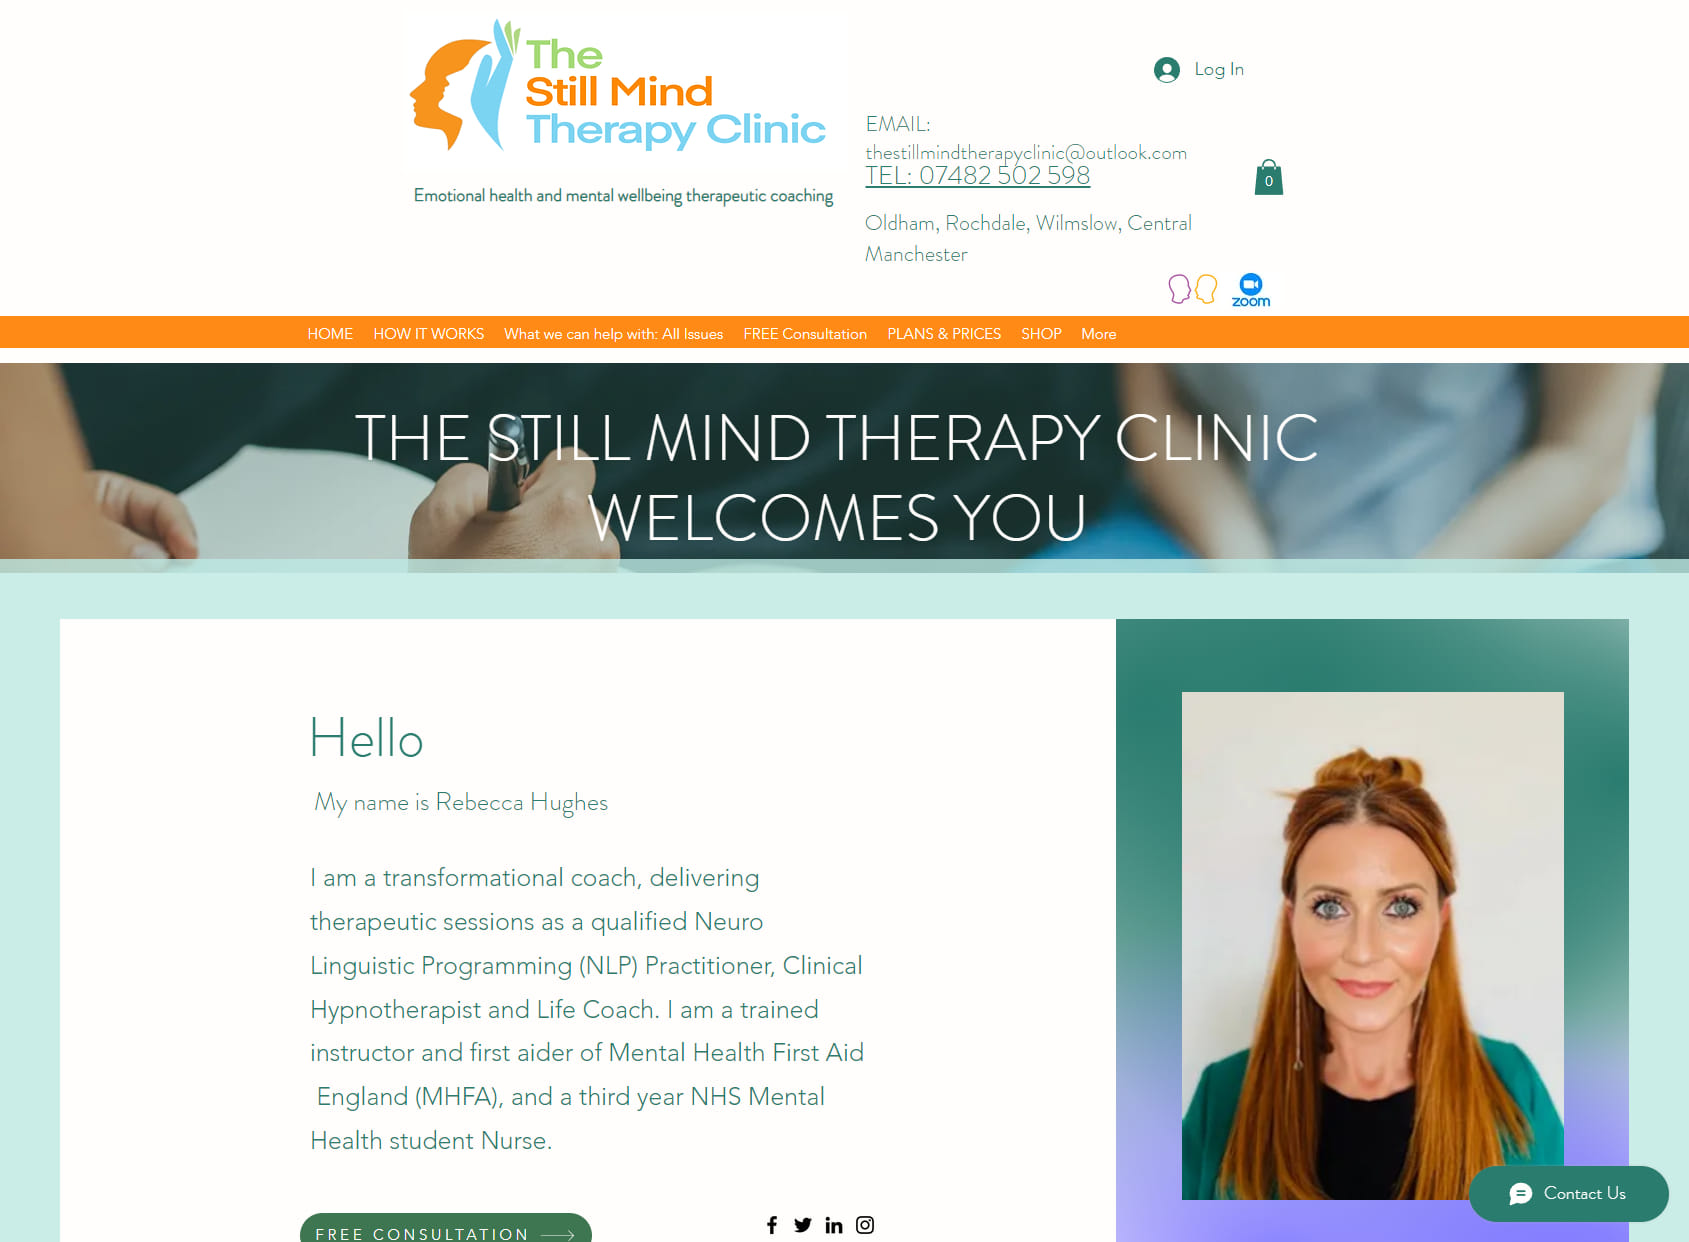 The Still Mind Therapy Clinic